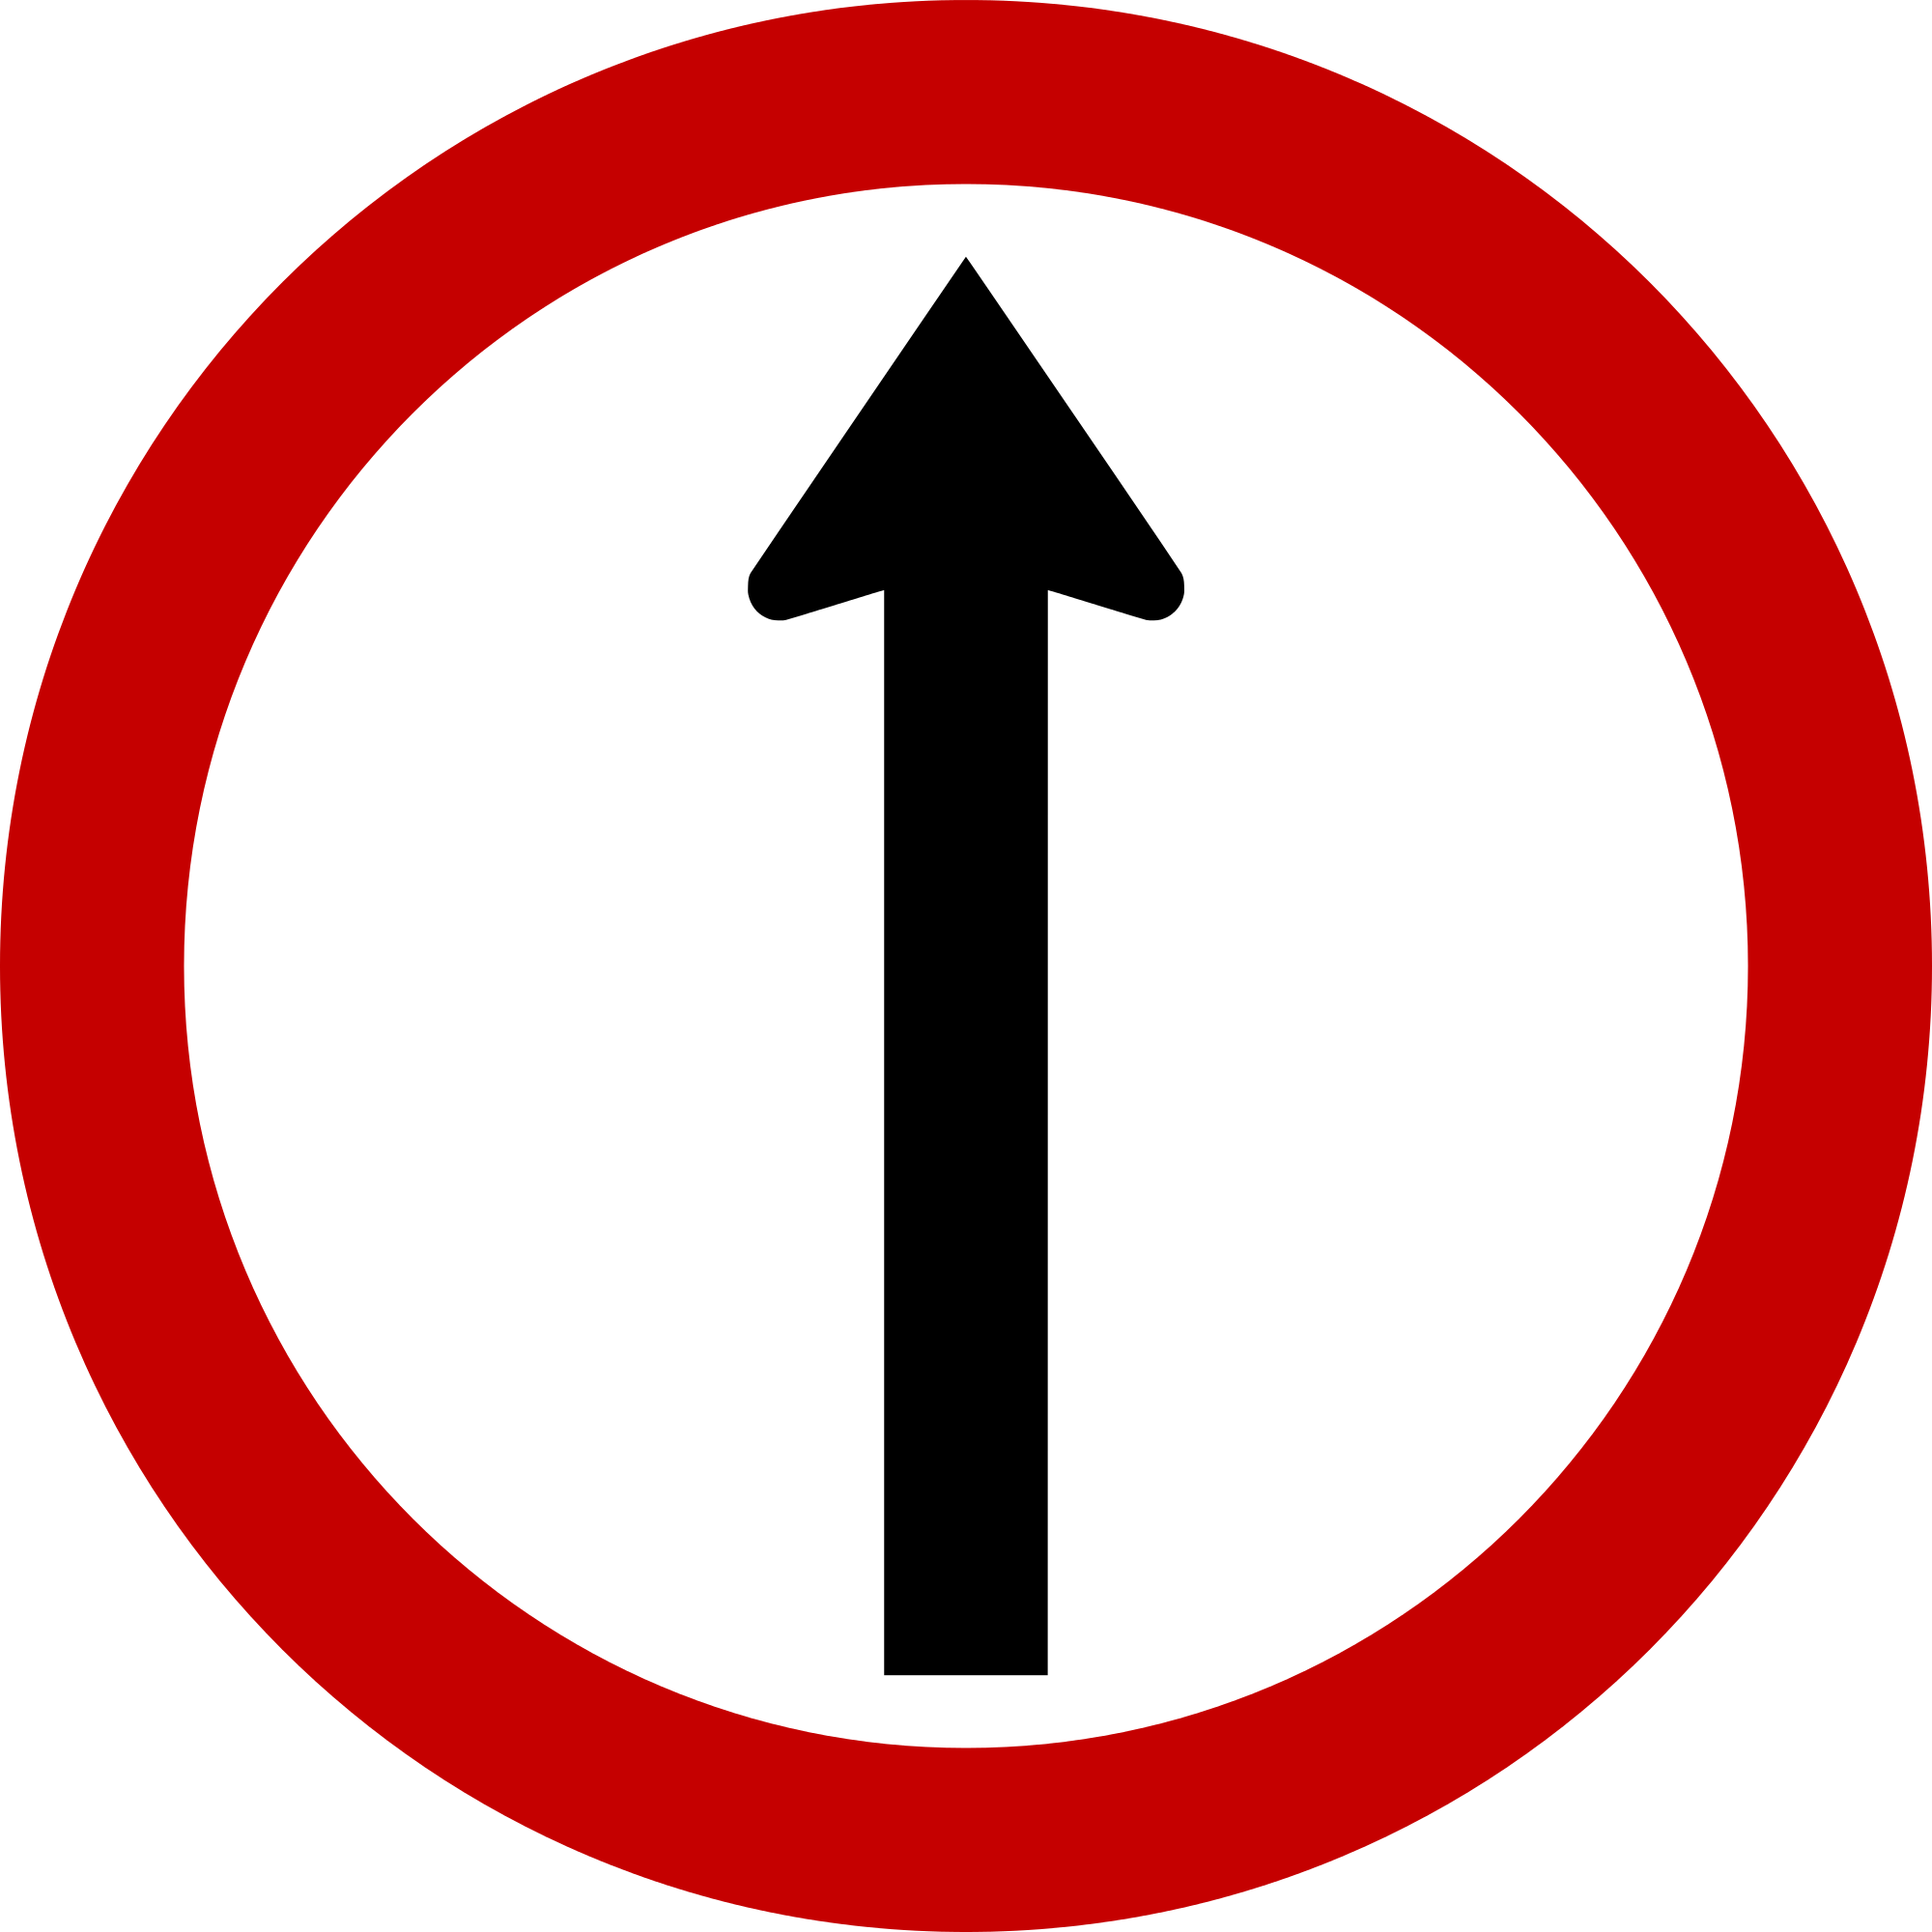 If You Are Thinking How Precisely You Get An Instant - No Straight Ahead Sign (2000x2000)